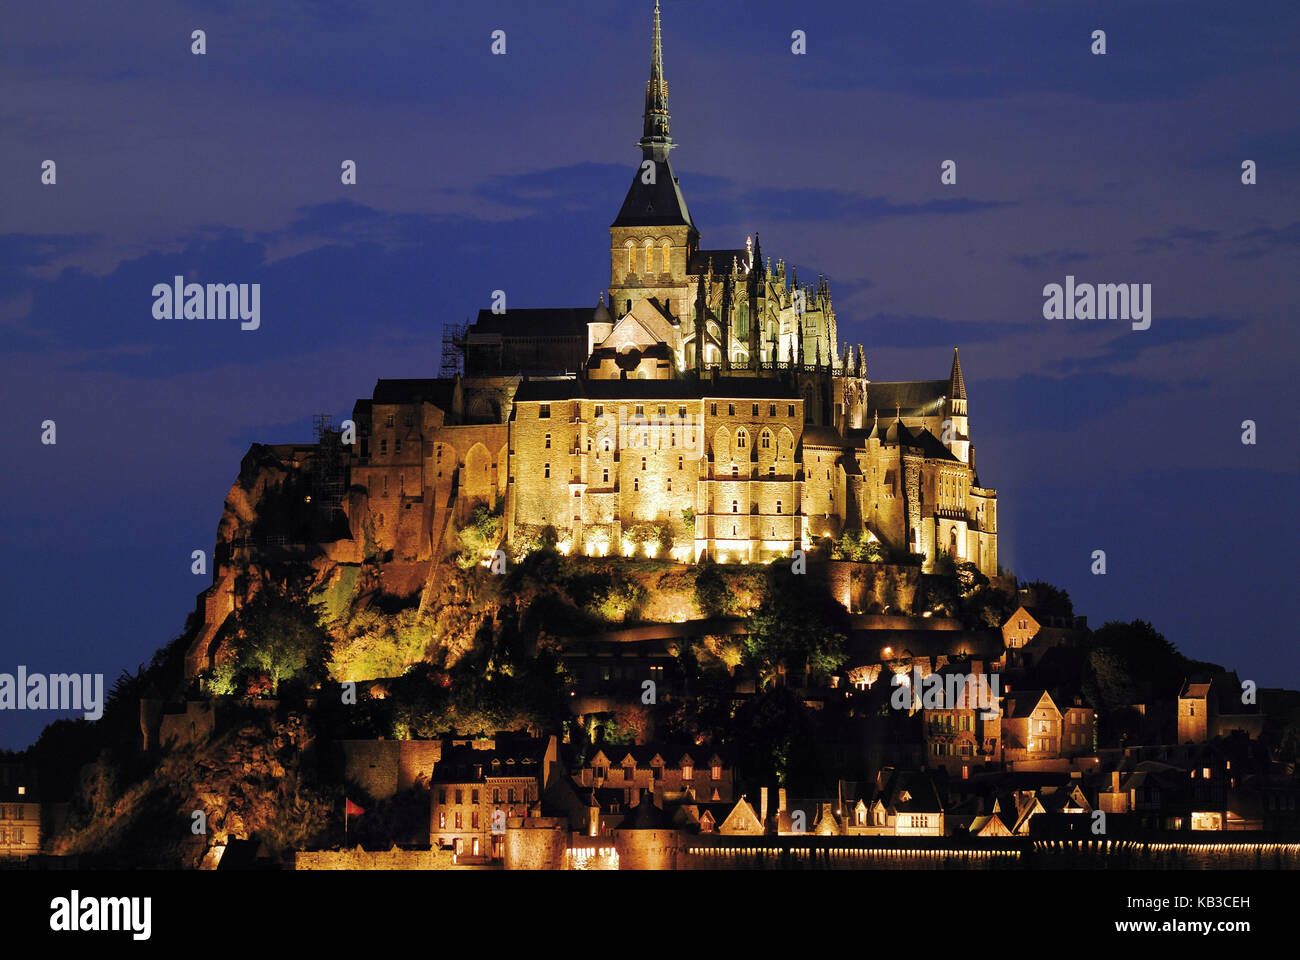 France, Normandy, monastery island Le Mont St. Michel by night, Stock Photo